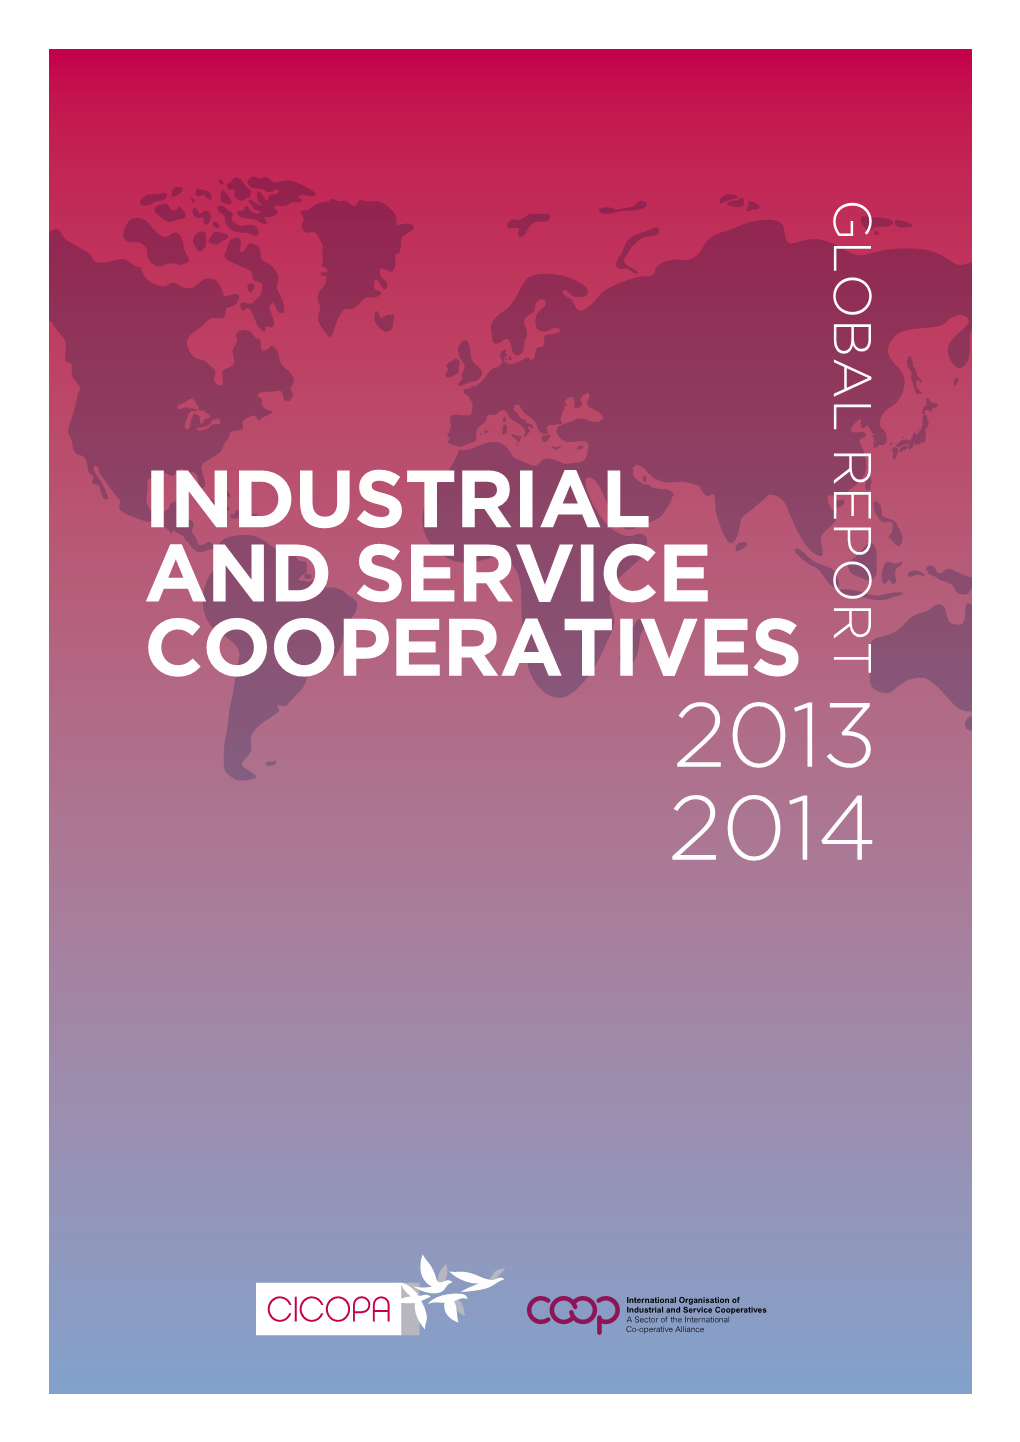 INDUSTRIAL and SERVICE COOPERATIVES 2013 - 2014 Copyright © 2015, CICOPA Graphic Design: Juan J